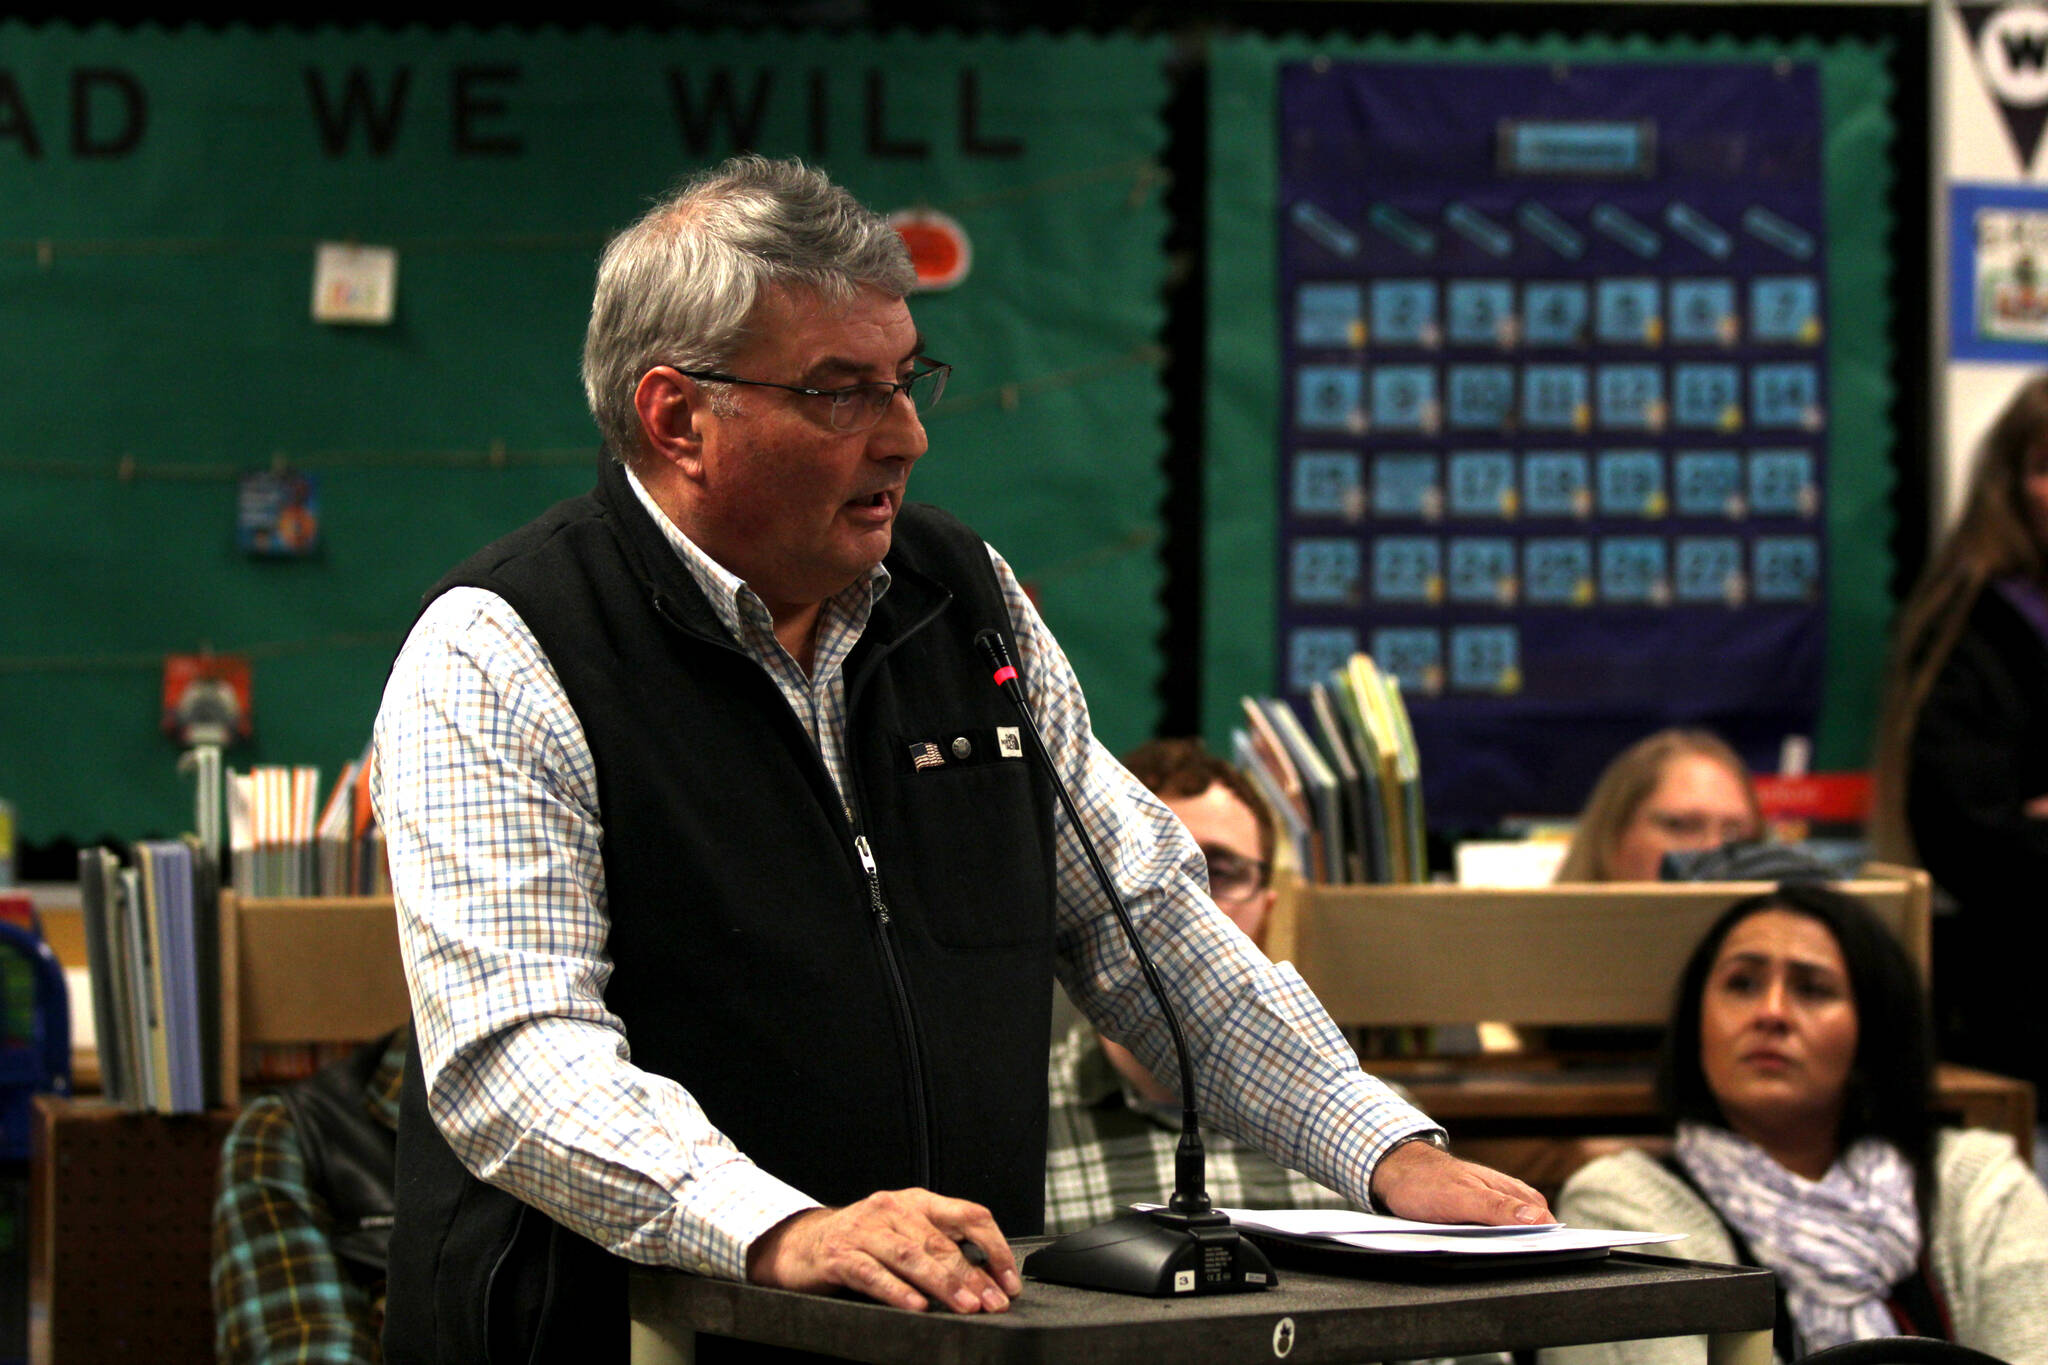 Ocean Shores Mayor Jon Martin speaks to the North Beach School District about a project to build a tsunami tower near Ocean Shores Elementary School on Jan. 17. (Michael S. Lockett / The Daily World)